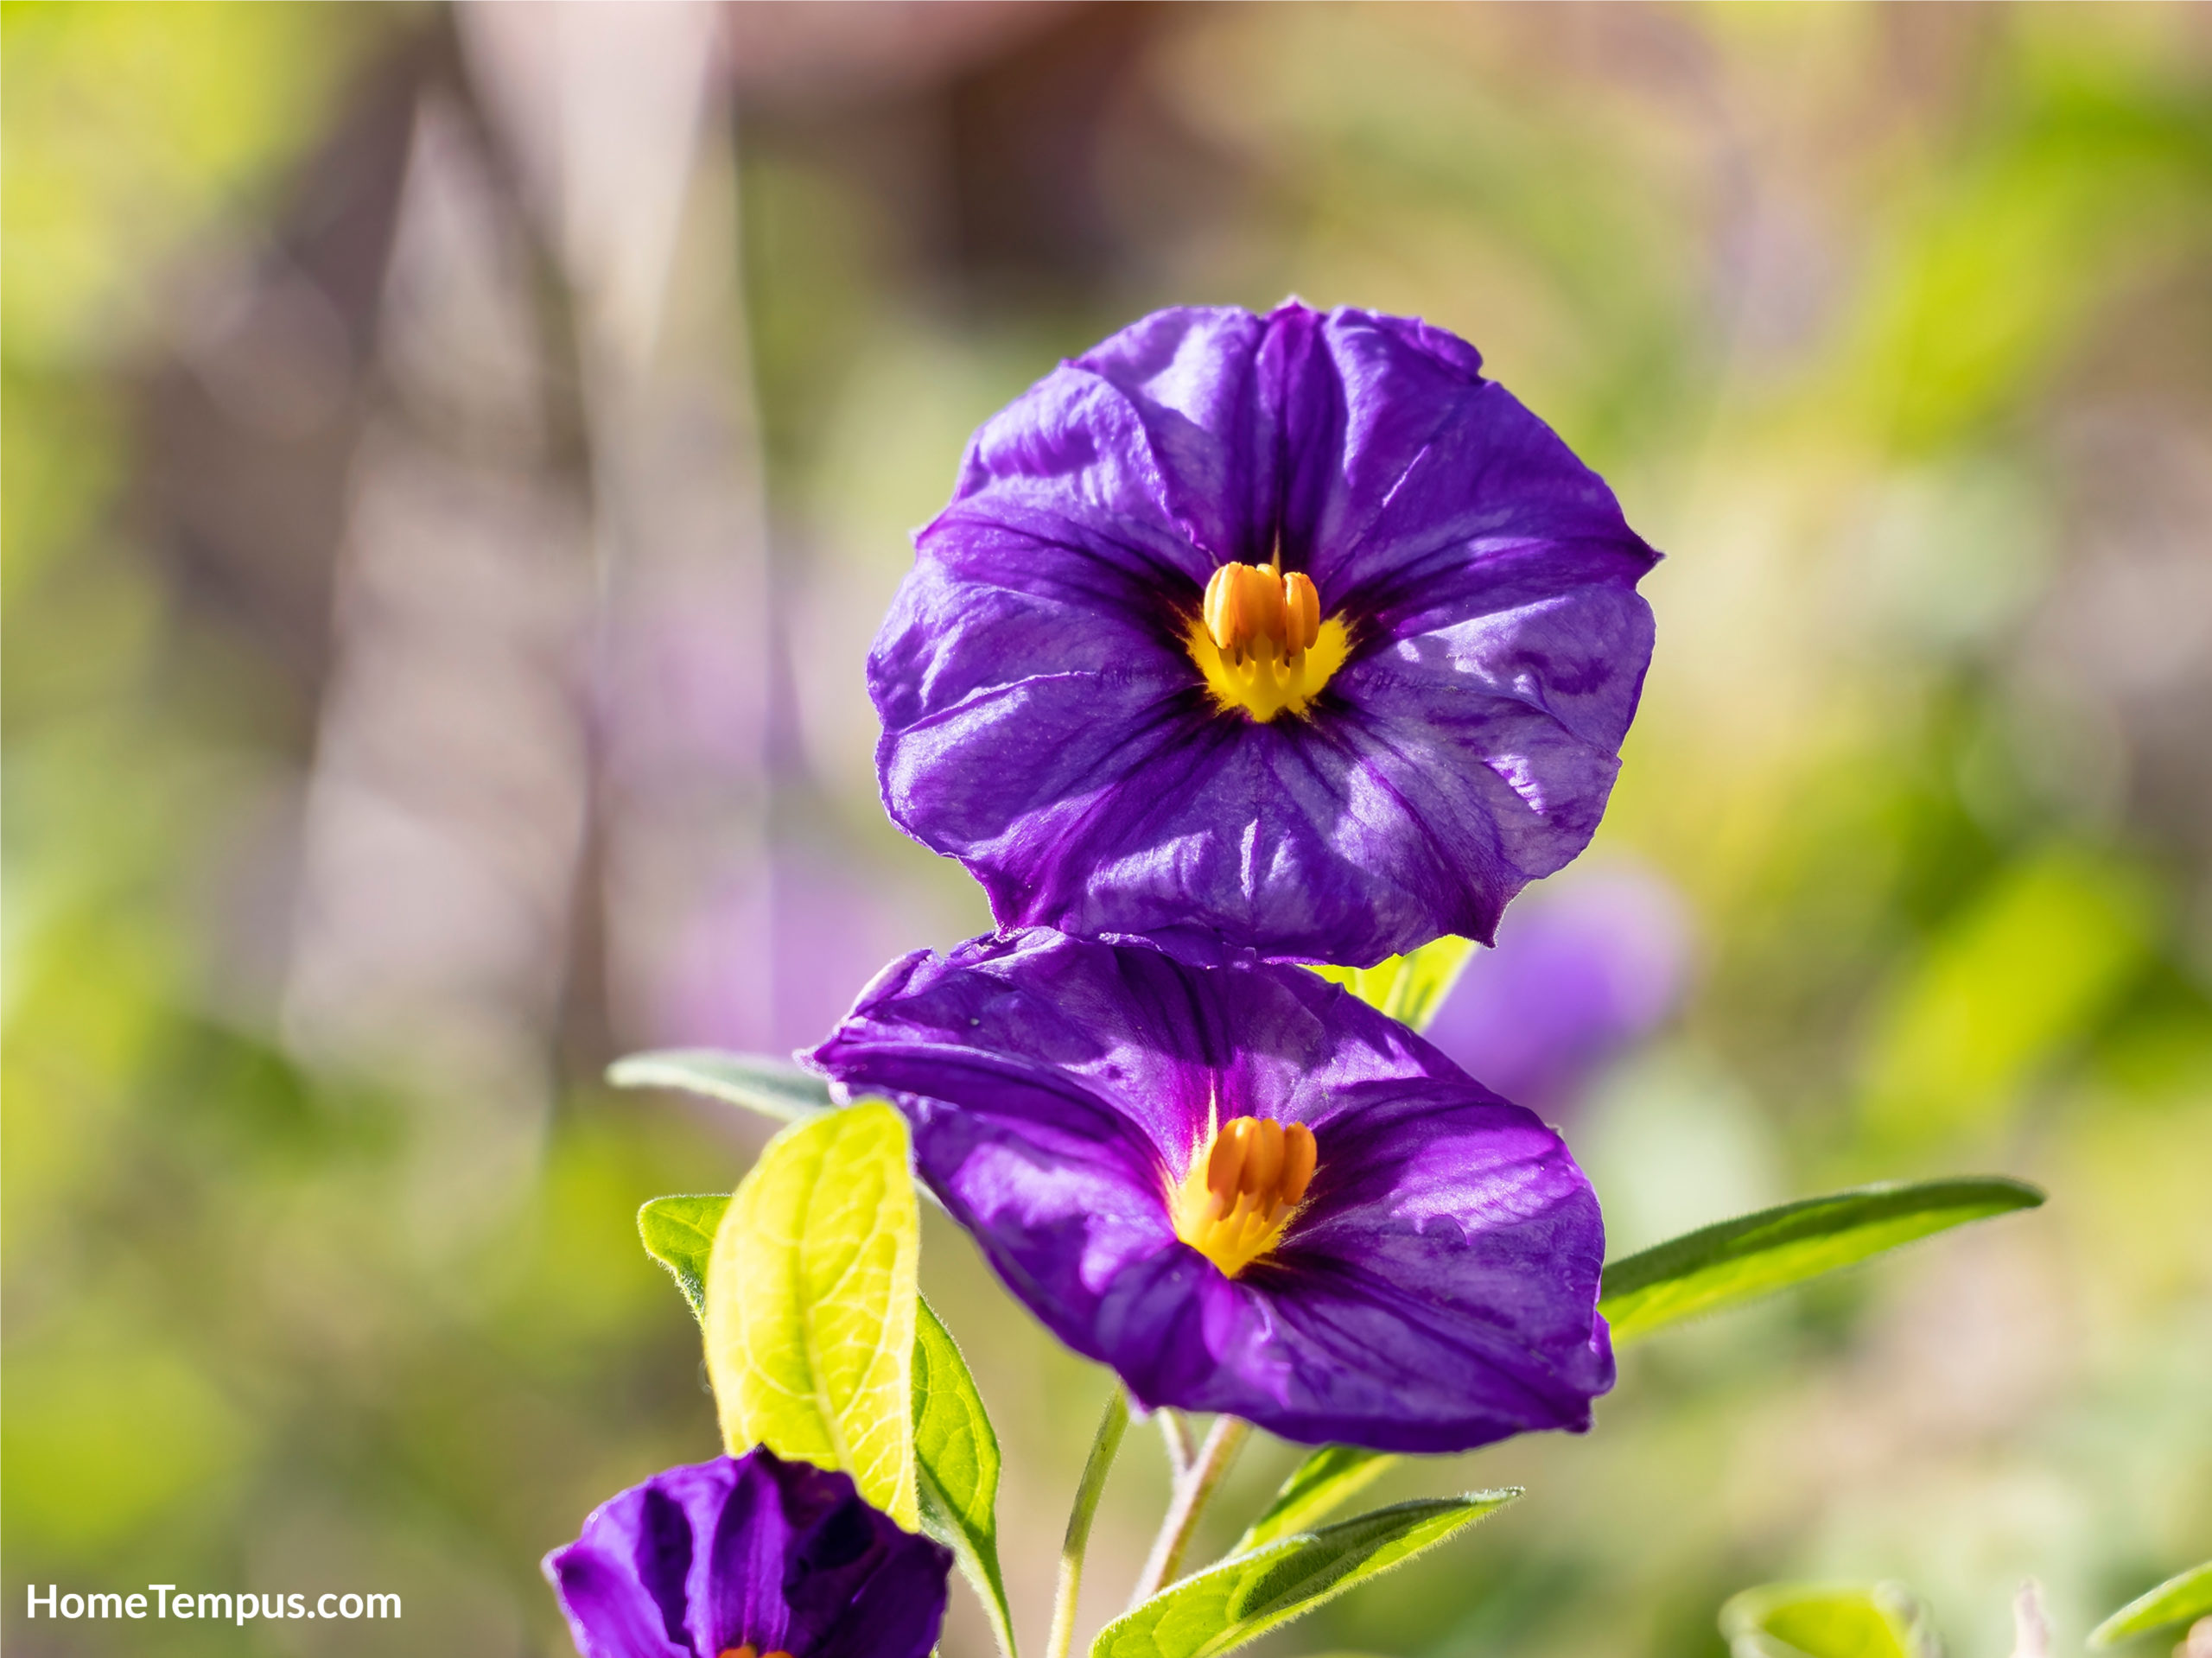 Lycianthes rantonnetii, the blue potato bush or Paraguay nightshade - flowers that start P